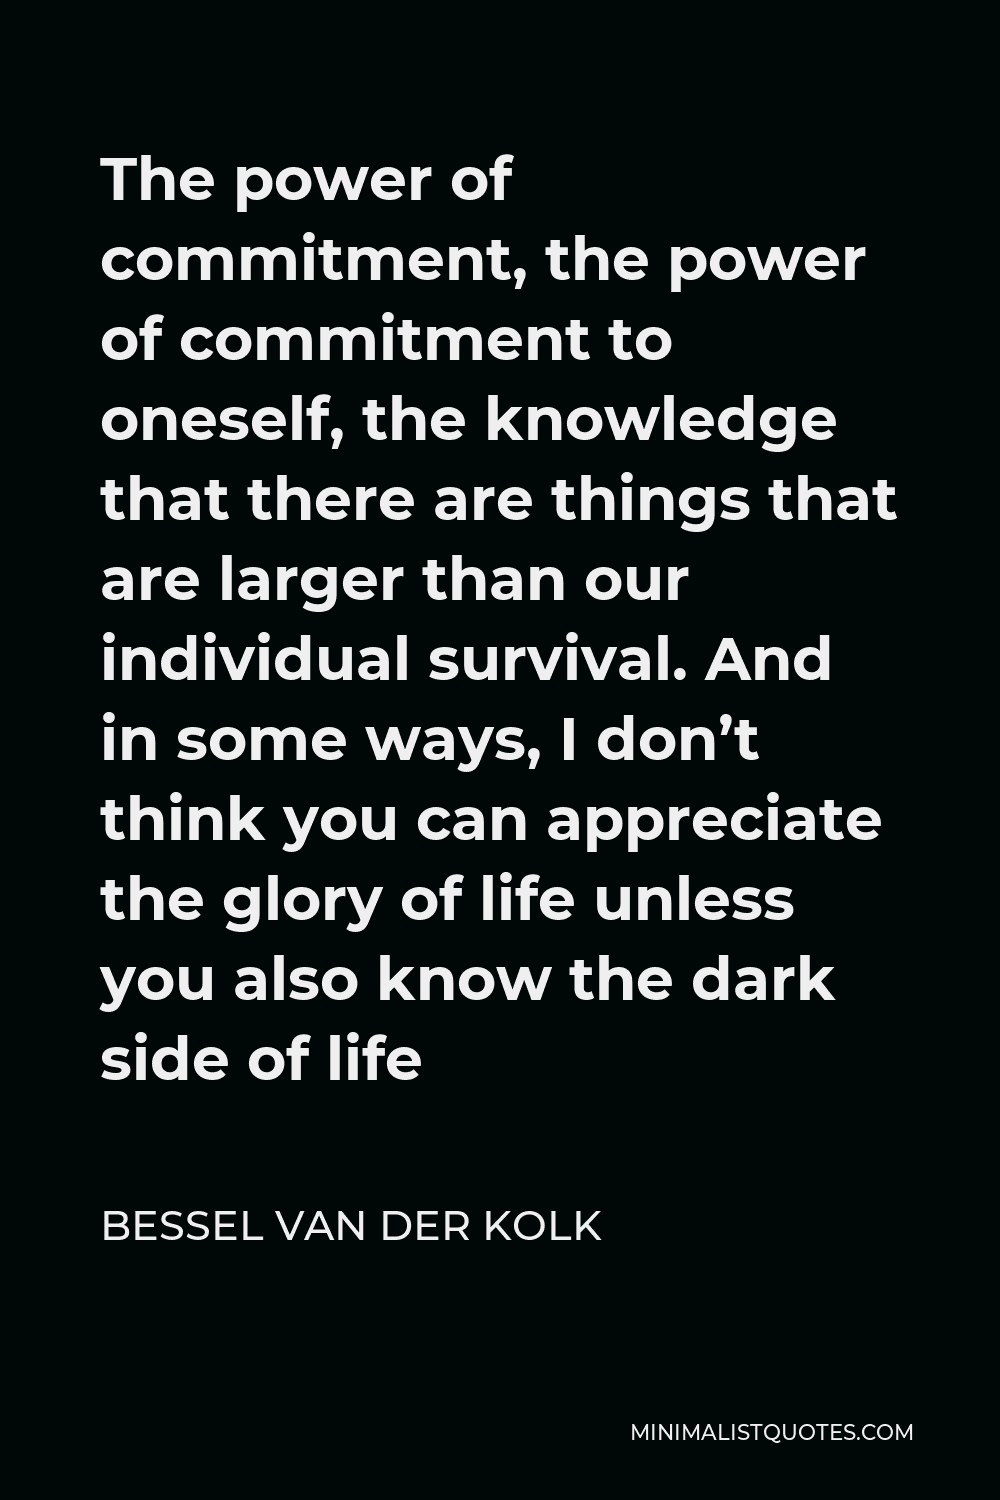 Bessel van der Kolk Quote - The power of commitment, the power of commitment to oneself, the knowledge that there are things that are larger than our individual survival. And in some ways, I don’t think you can appreciate the glory of life unless you also know the dark side of life